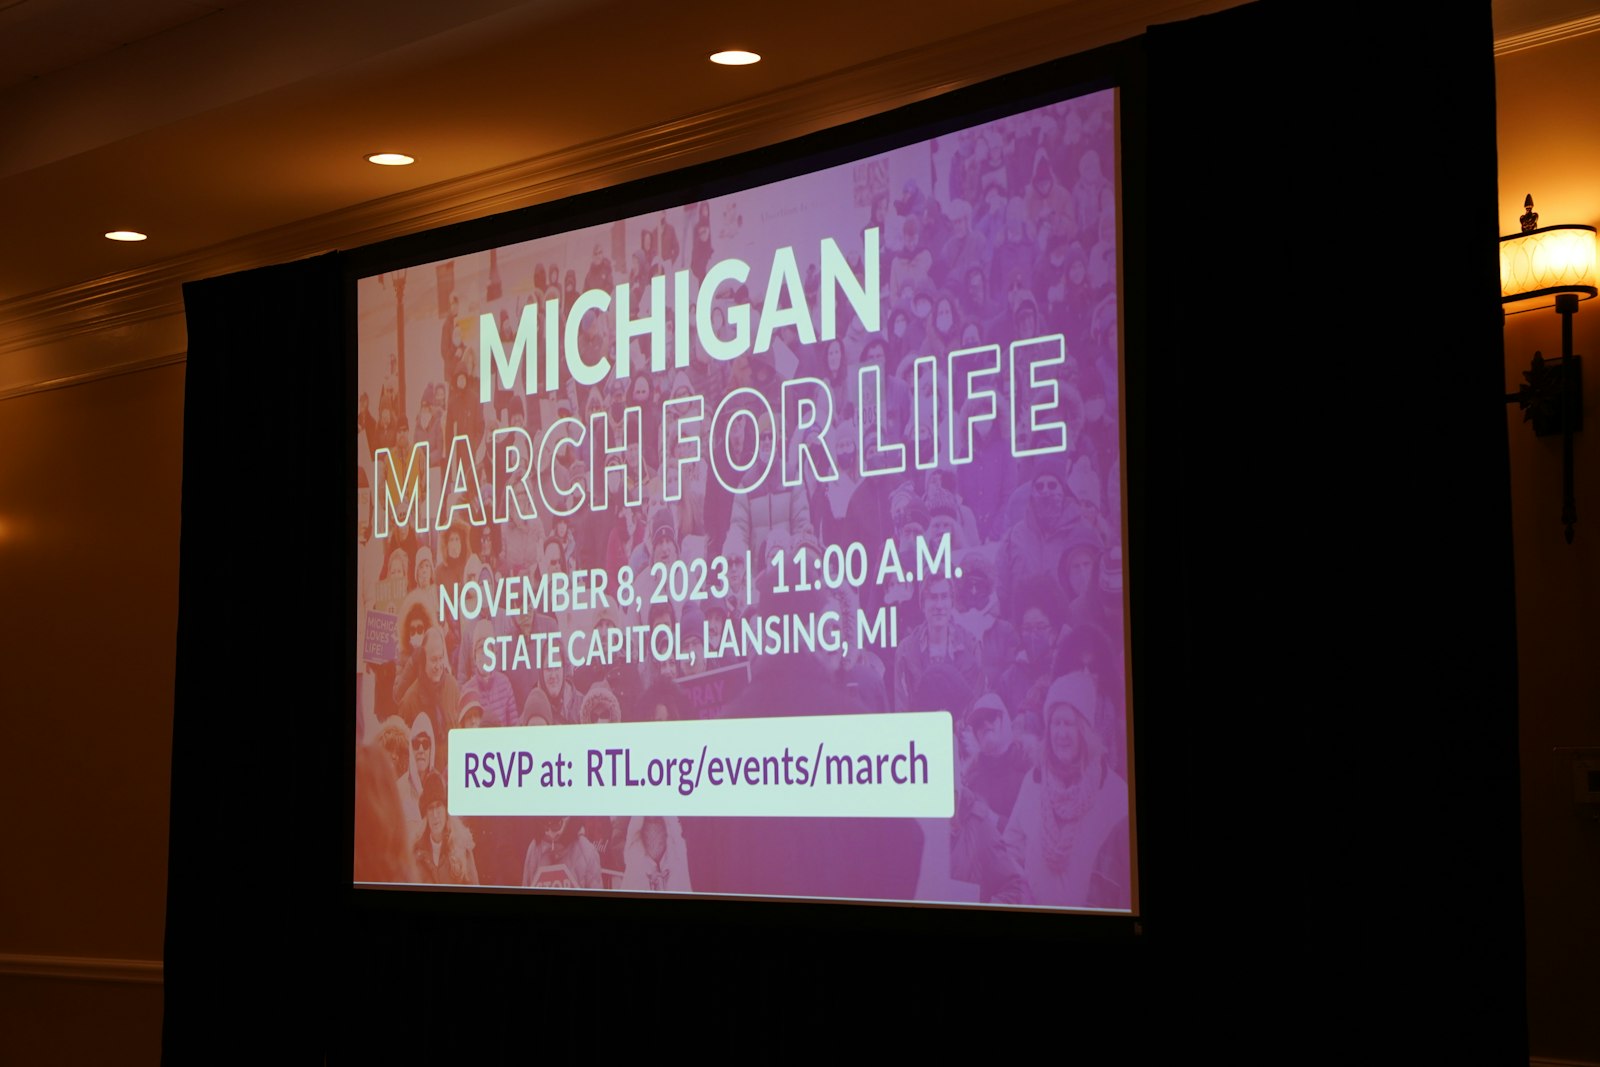 Details of the Michigan March for Life, which will take place Nov. 8 at the Michigan state capitol in Lansing, are pictured on a projector screen.